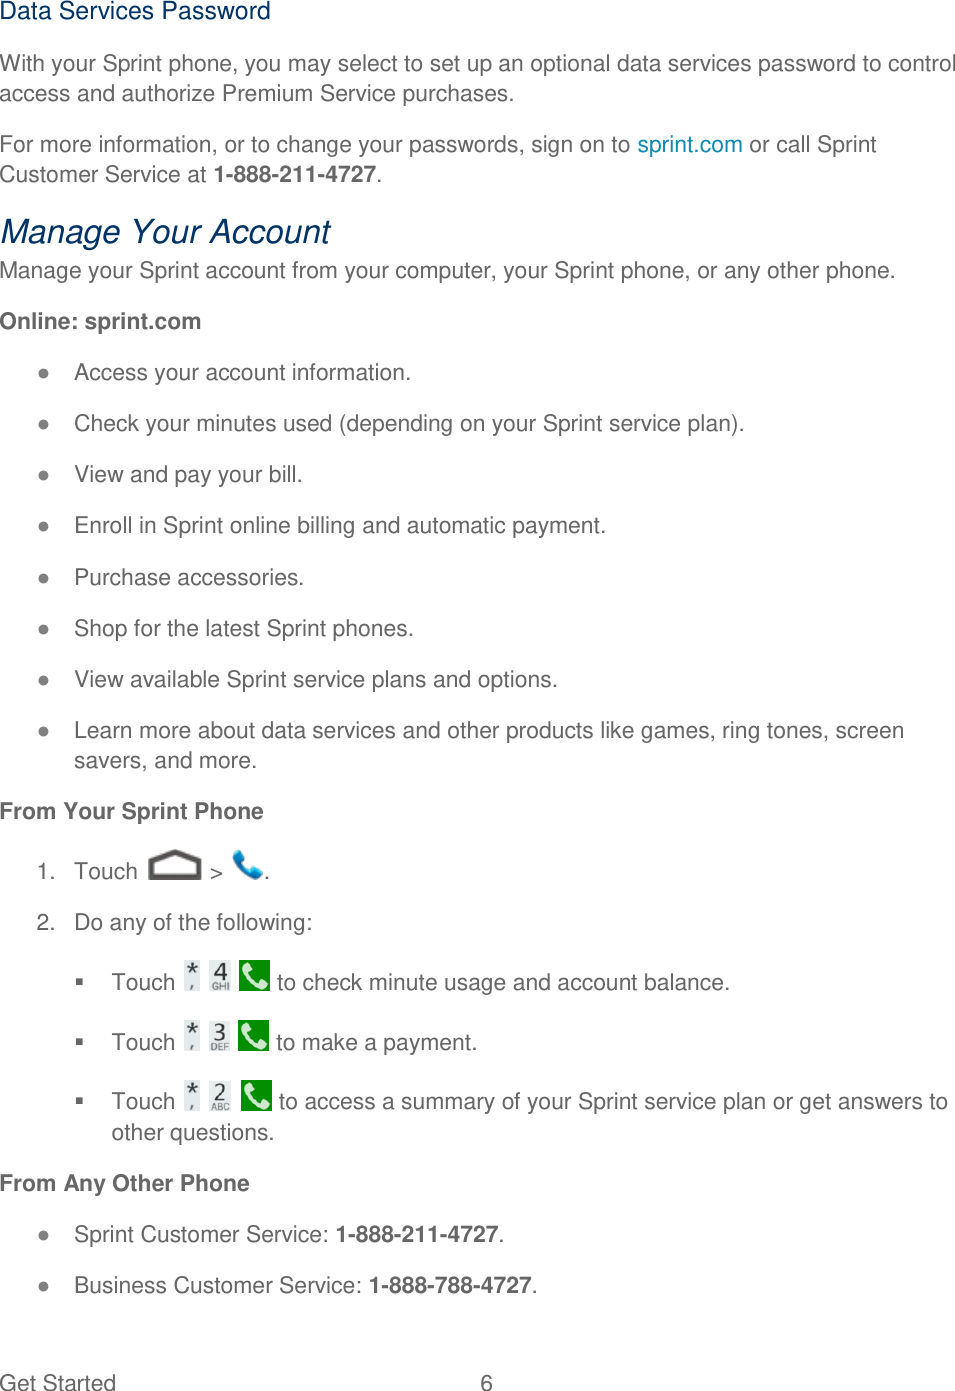 Get Started  6   Data Services Password With your Sprint phone, you may select to set up an optional data services password to control access and authorize Premium Service purchases. For more information, or to change your passwords, sign on to sprint.com or call Sprint Customer Service at 1-888-211-4727. Manage Your Account Manage your Sprint account from your computer, your Sprint phone, or any other phone. Online: sprint.com ● Access your account information. ● Check your minutes used (depending on your Sprint service plan). ● View and pay your bill. ● Enroll in Sprint online billing and automatic payment. ● Purchase accessories. ● Shop for the latest Sprint phones. ● View available Sprint service plans and options. ● Learn more about data services and other products like games, ring tones, screen savers, and more. From Your Sprint Phone 1.  Touch   &gt;  . 2.  Do any of the following:   Touch       to check minute usage and account balance.   Touch       to make a payment.   Touch       to access a summary of your Sprint service plan or get answers to other questions. From Any Other Phone ● Sprint Customer Service: 1-888-211-4727. ● Business Customer Service: 1-888-788-4727. 